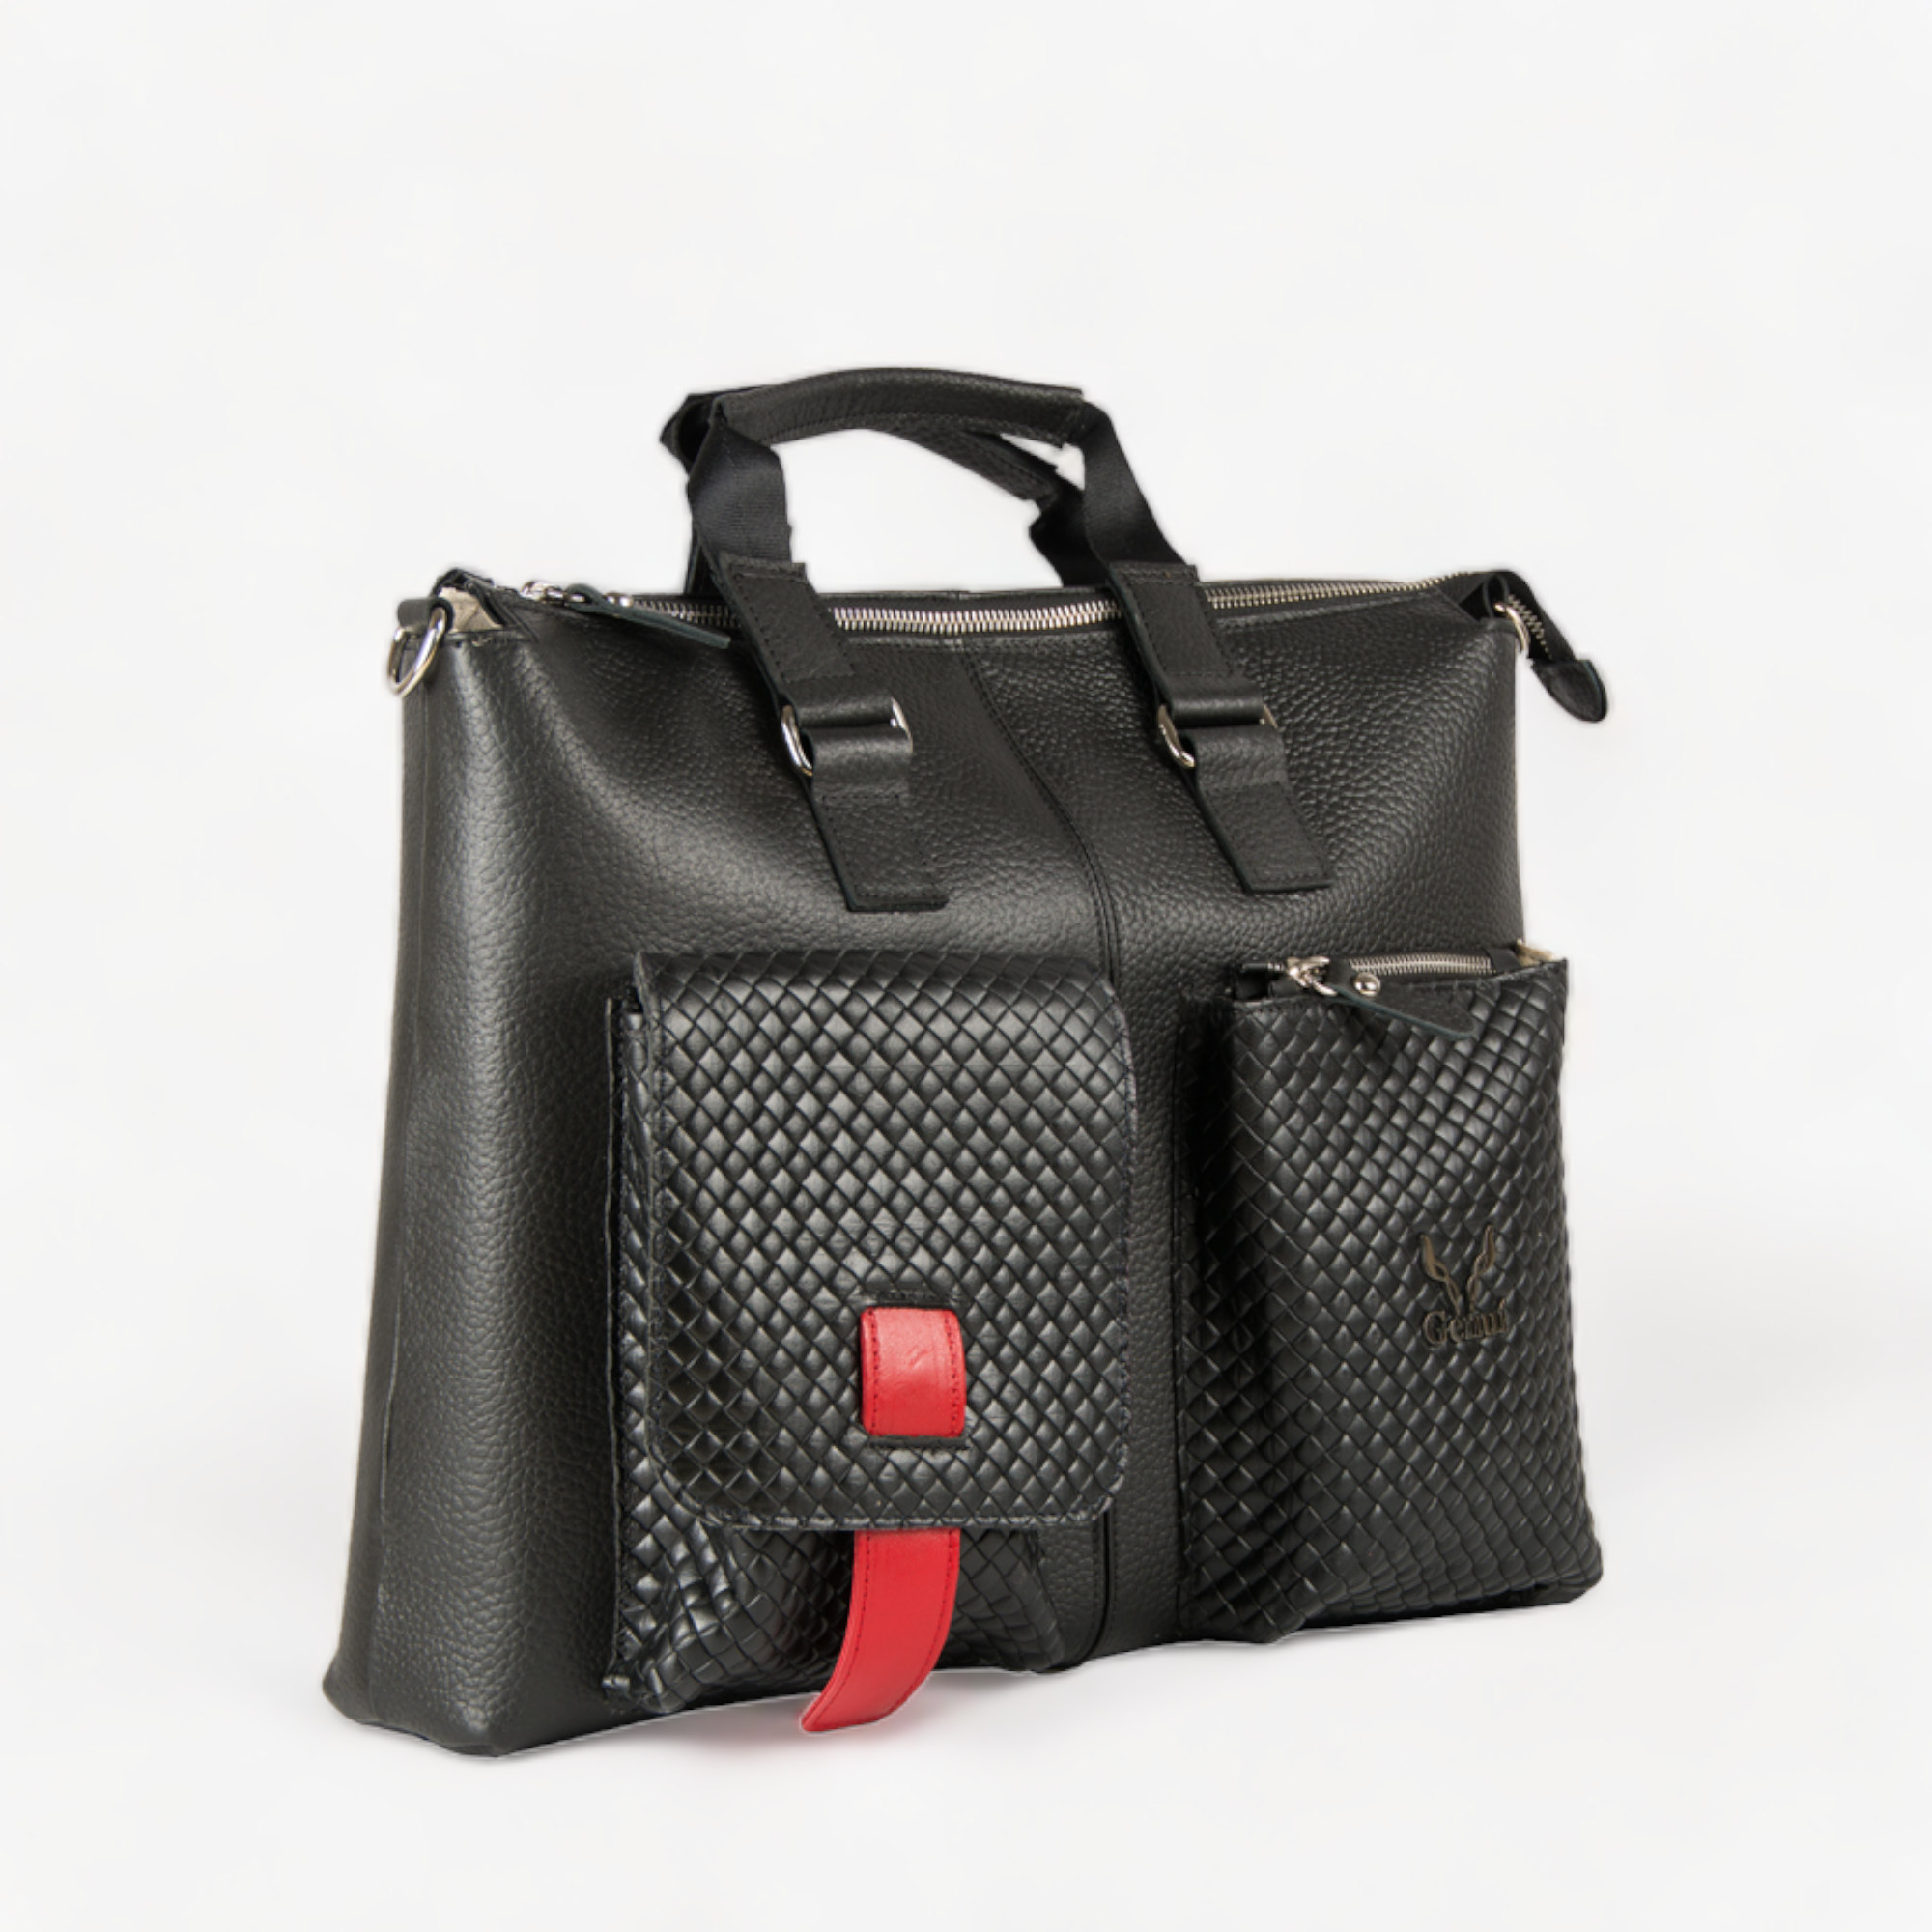 Leather briefcase in black color with red details